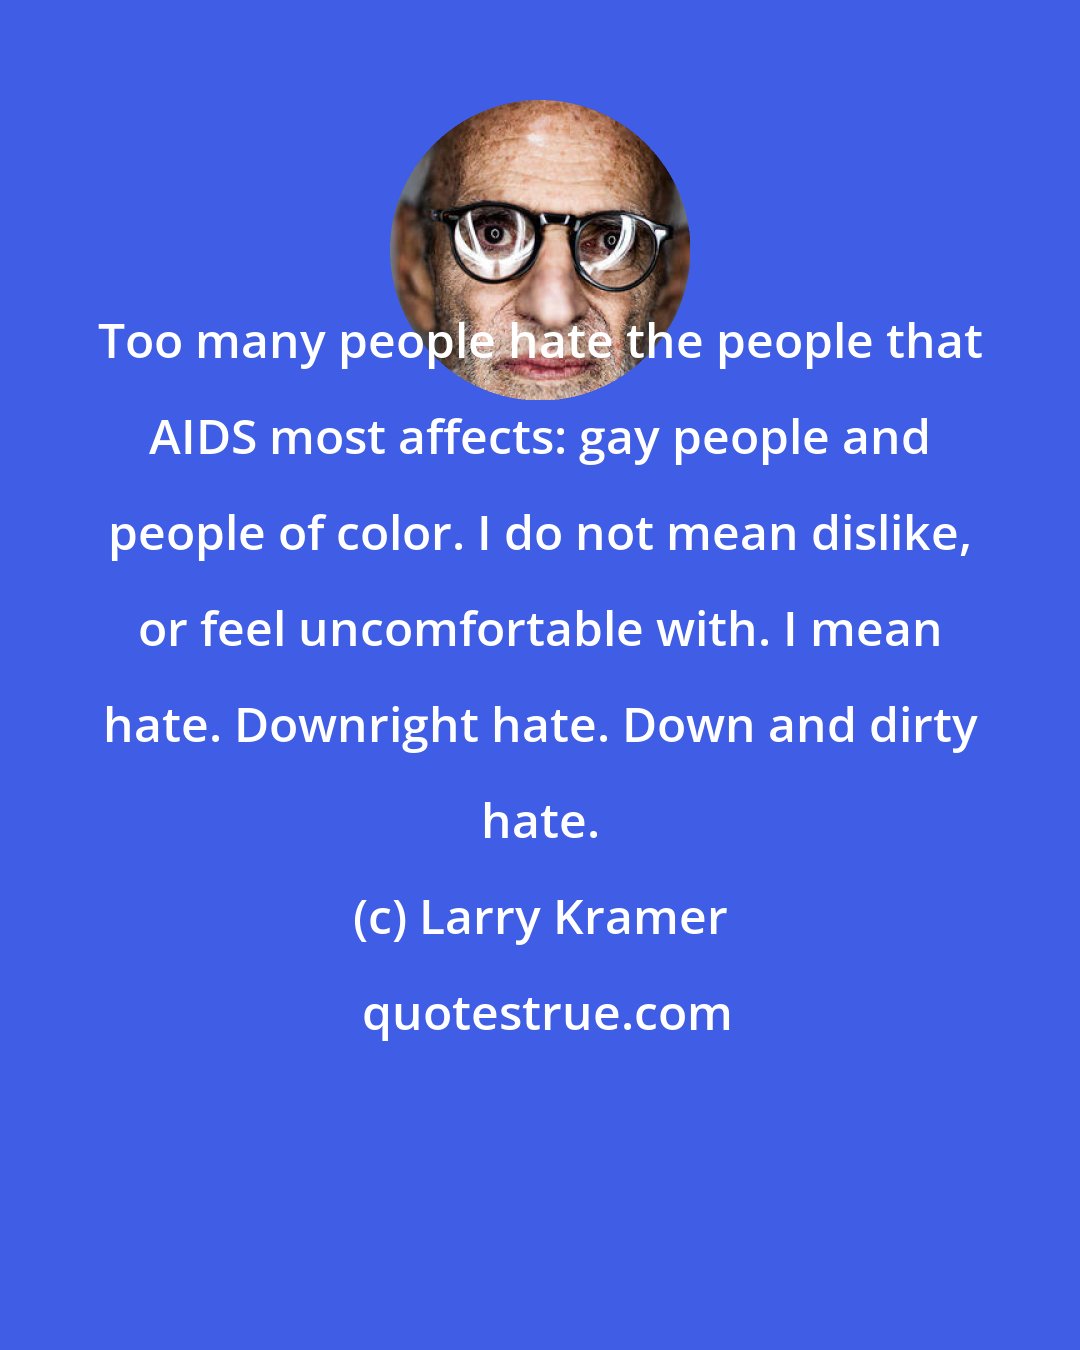 Larry Kramer: Too many people hate the people that AIDS most affects: gay people and people of color. I do not mean dislike, or feel uncomfortable with. I mean hate. Downright hate. Down and dirty hate.